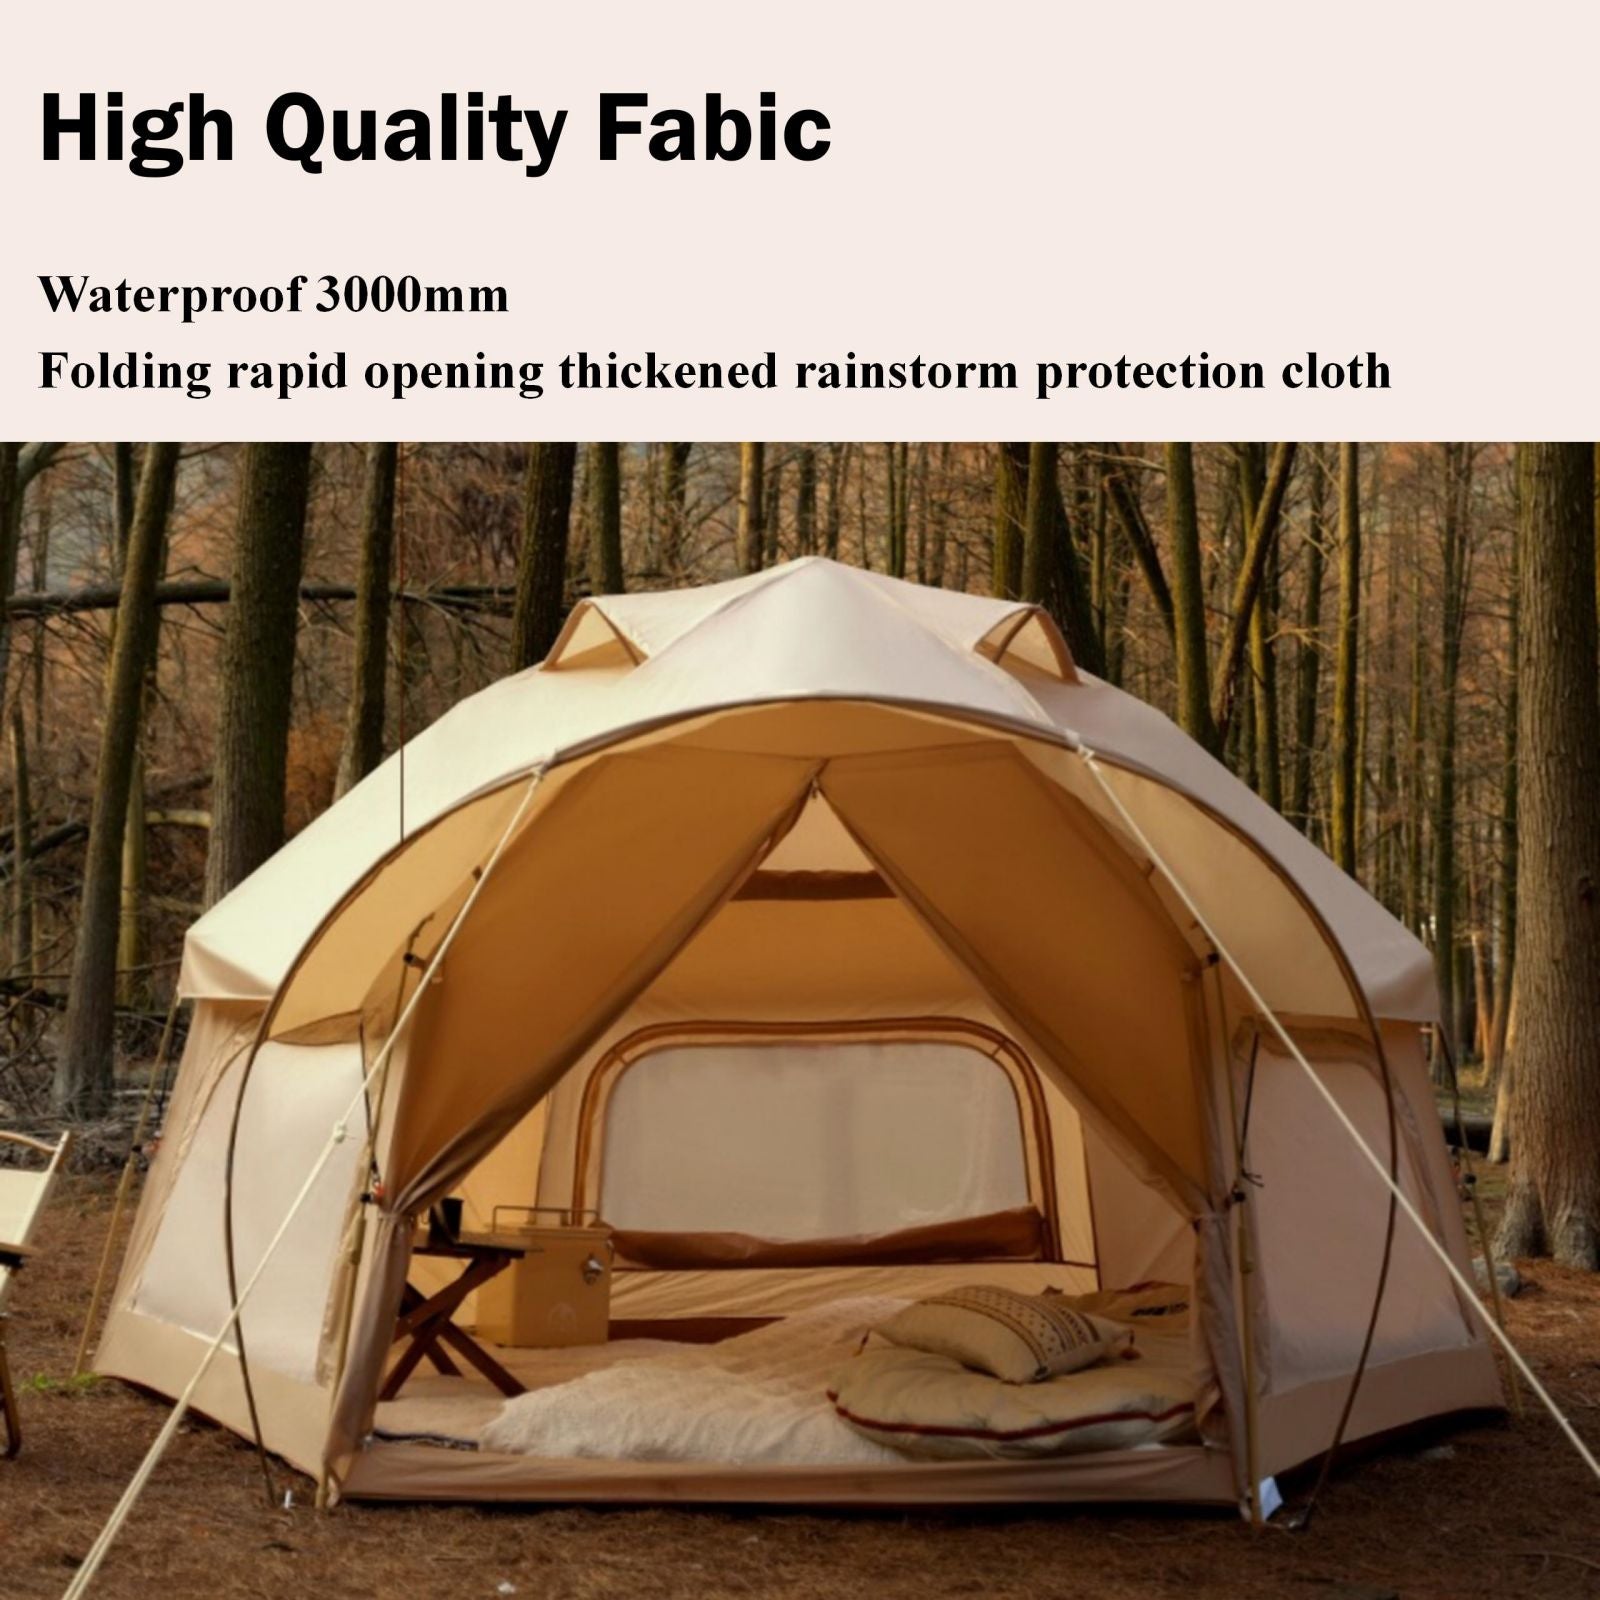 Large Space Luxury Frog Hexagonal Tent 5-8 Person Double Layer - Khaki - SILBERSHELL